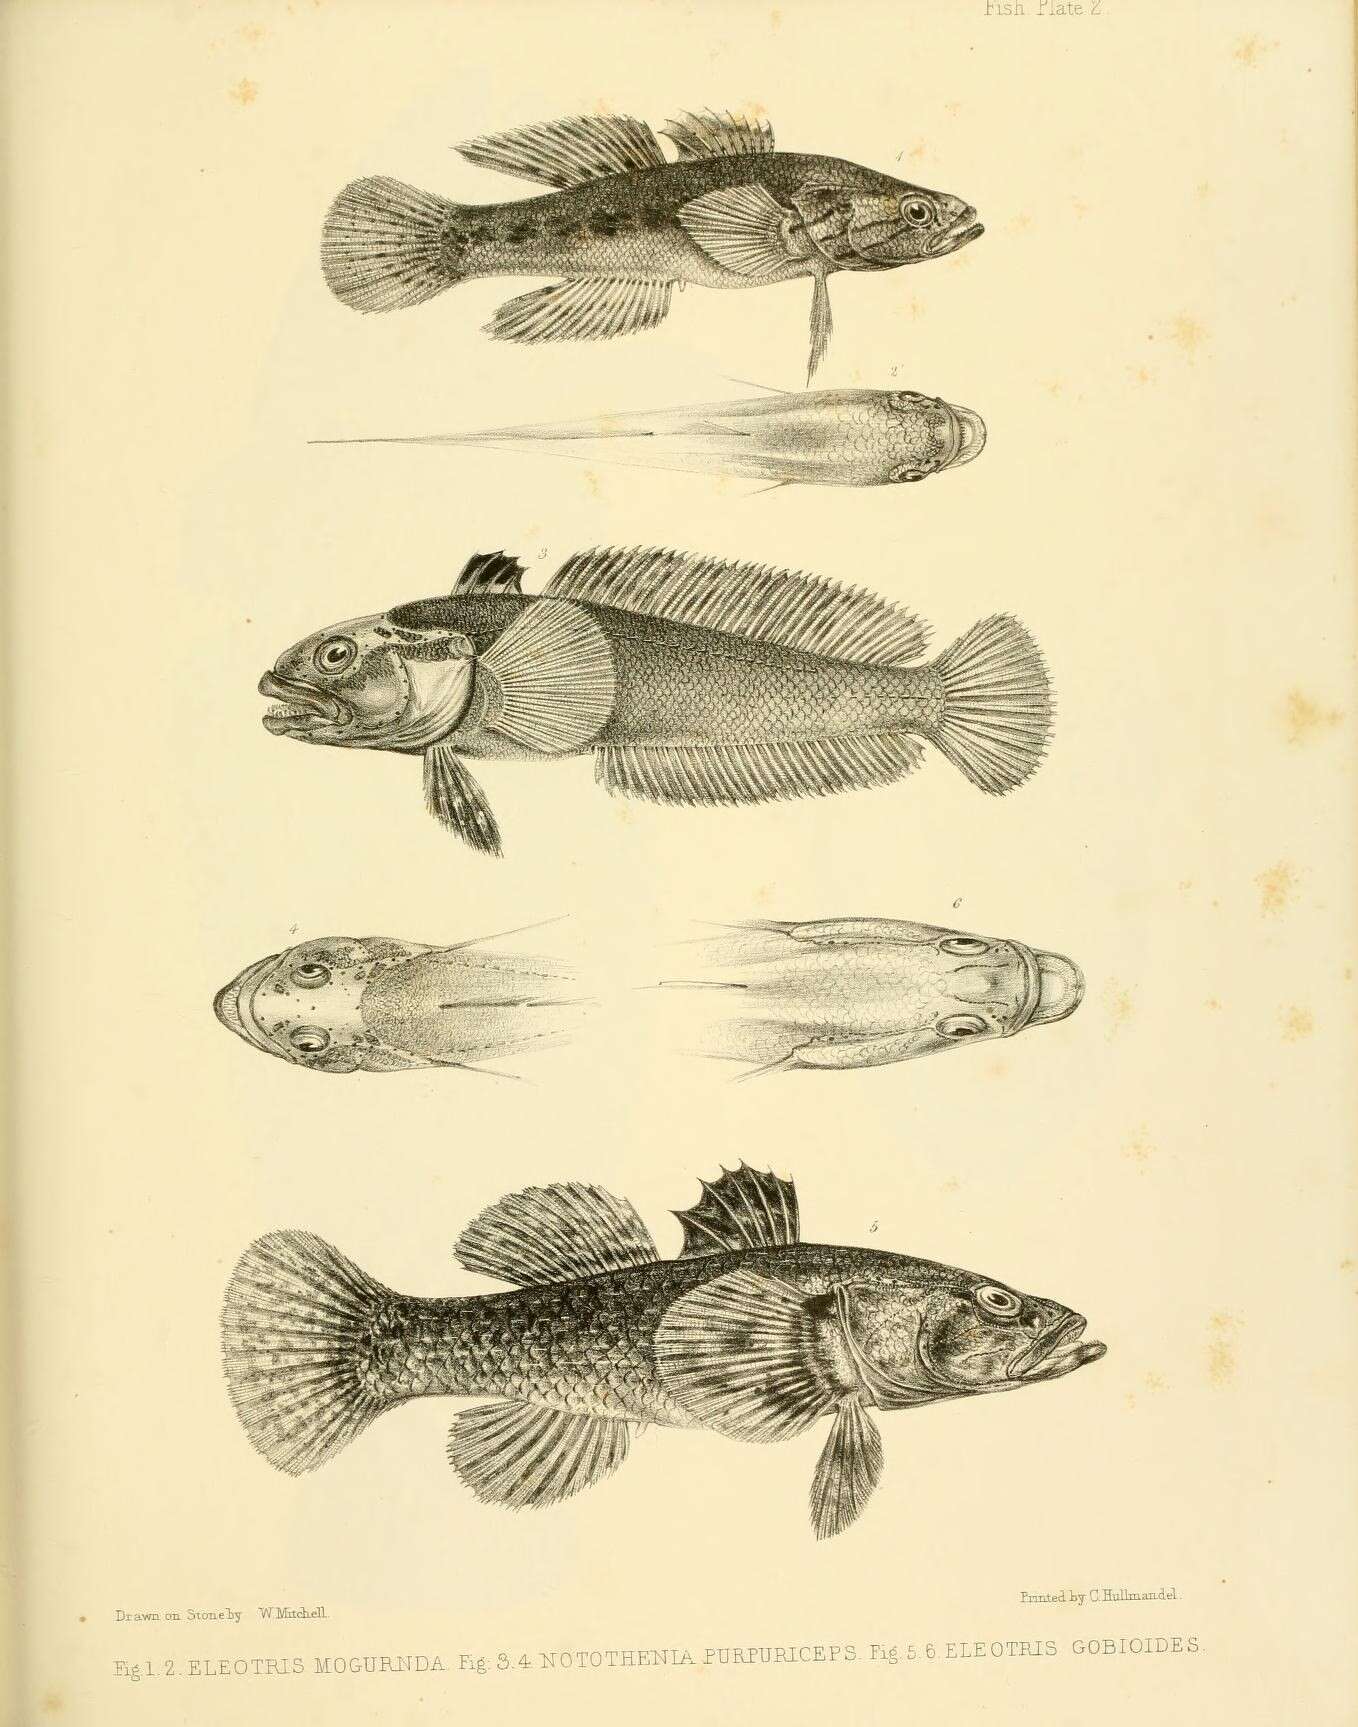 Image of Northern purplespotted gudgeon